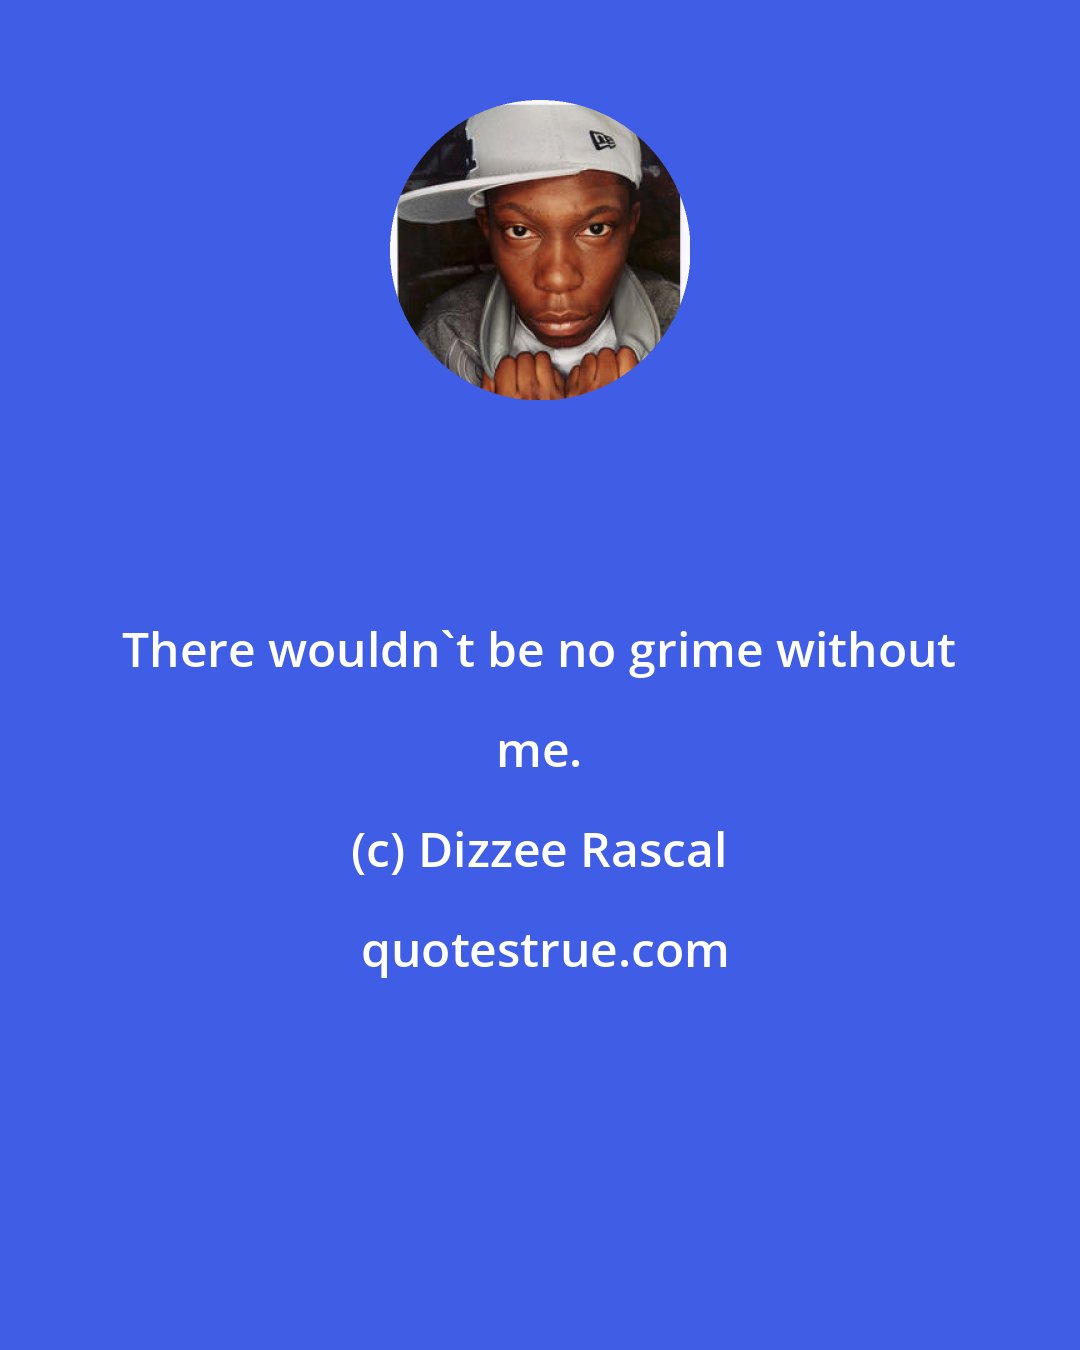 Dizzee Rascal: There wouldn't be no grime without me.